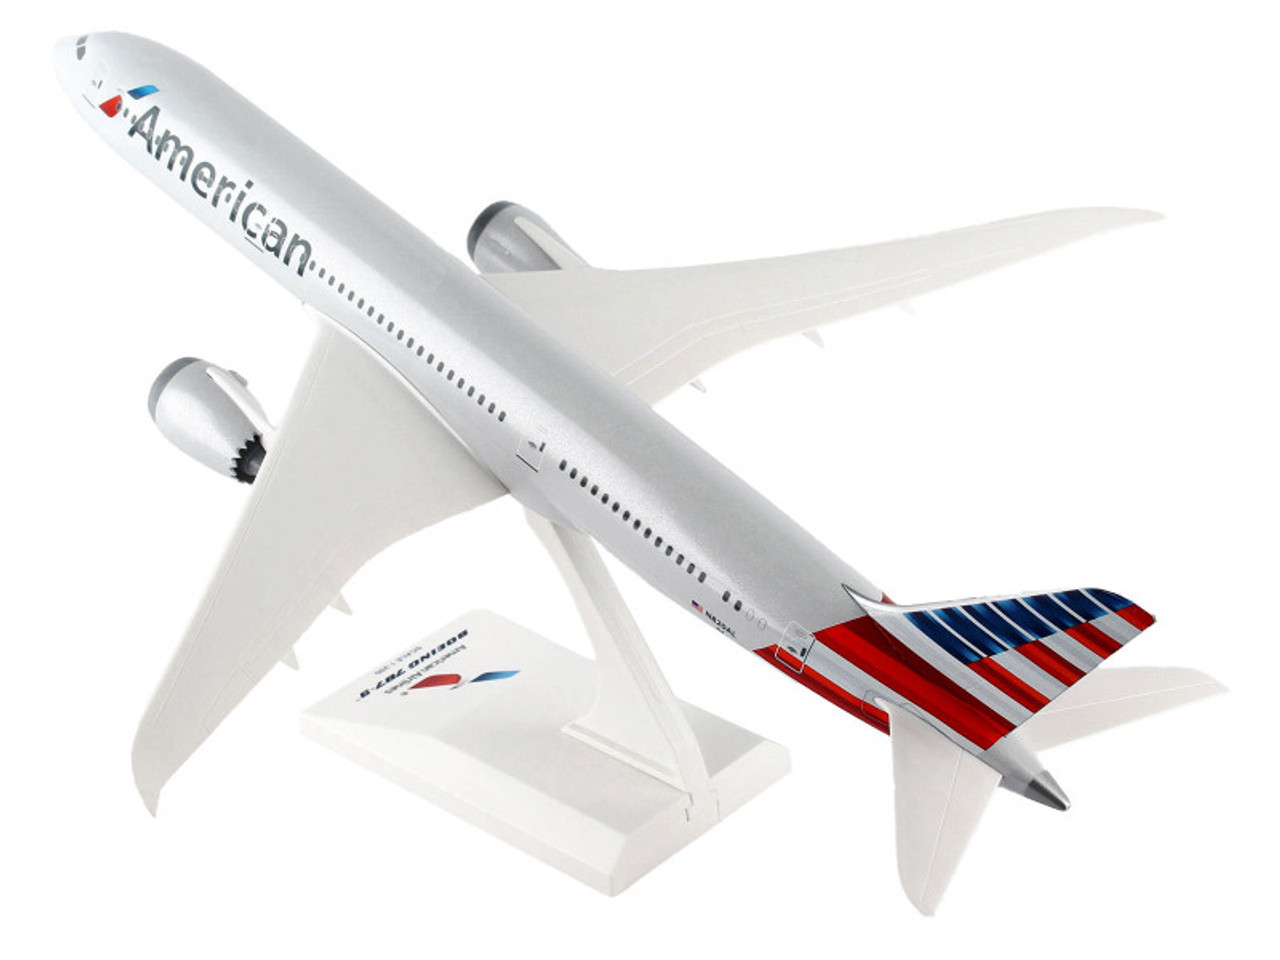 Boeing 787-9 Commercial Aircraft "American Airlines" (N820AL) Gray with Blue and Red Tail (Snap-Fit) 1/200 Plastic Model by Skymarks